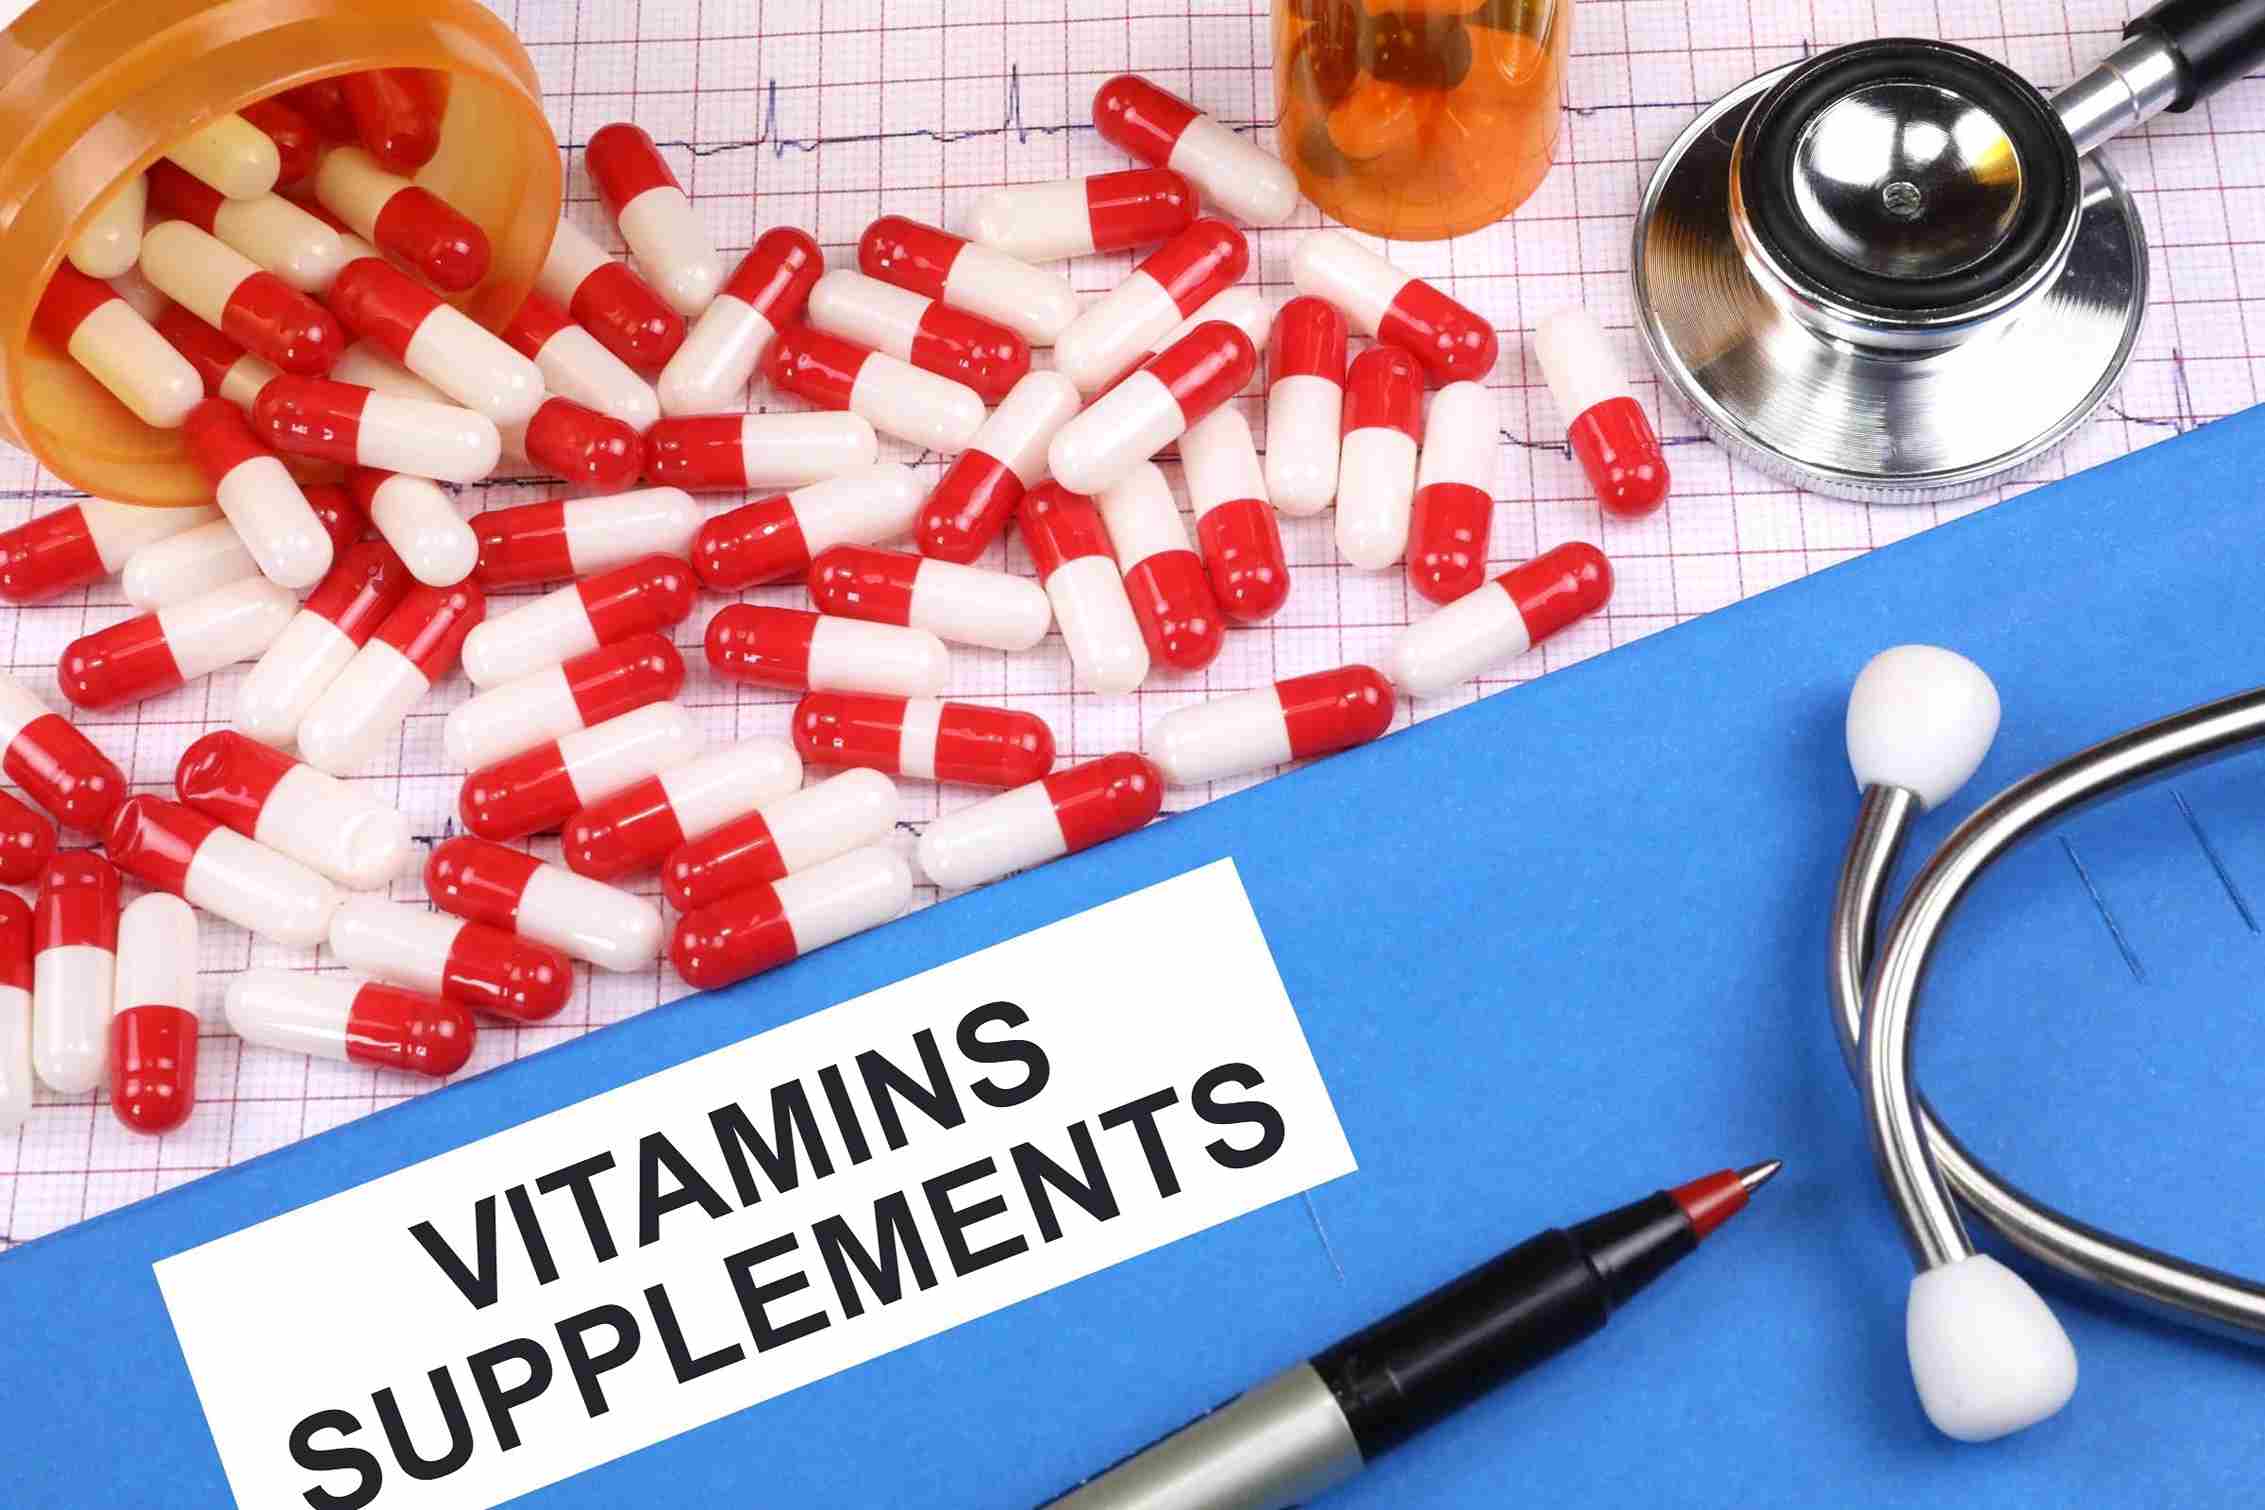 Benefits of Daily Vitamins and Supplements